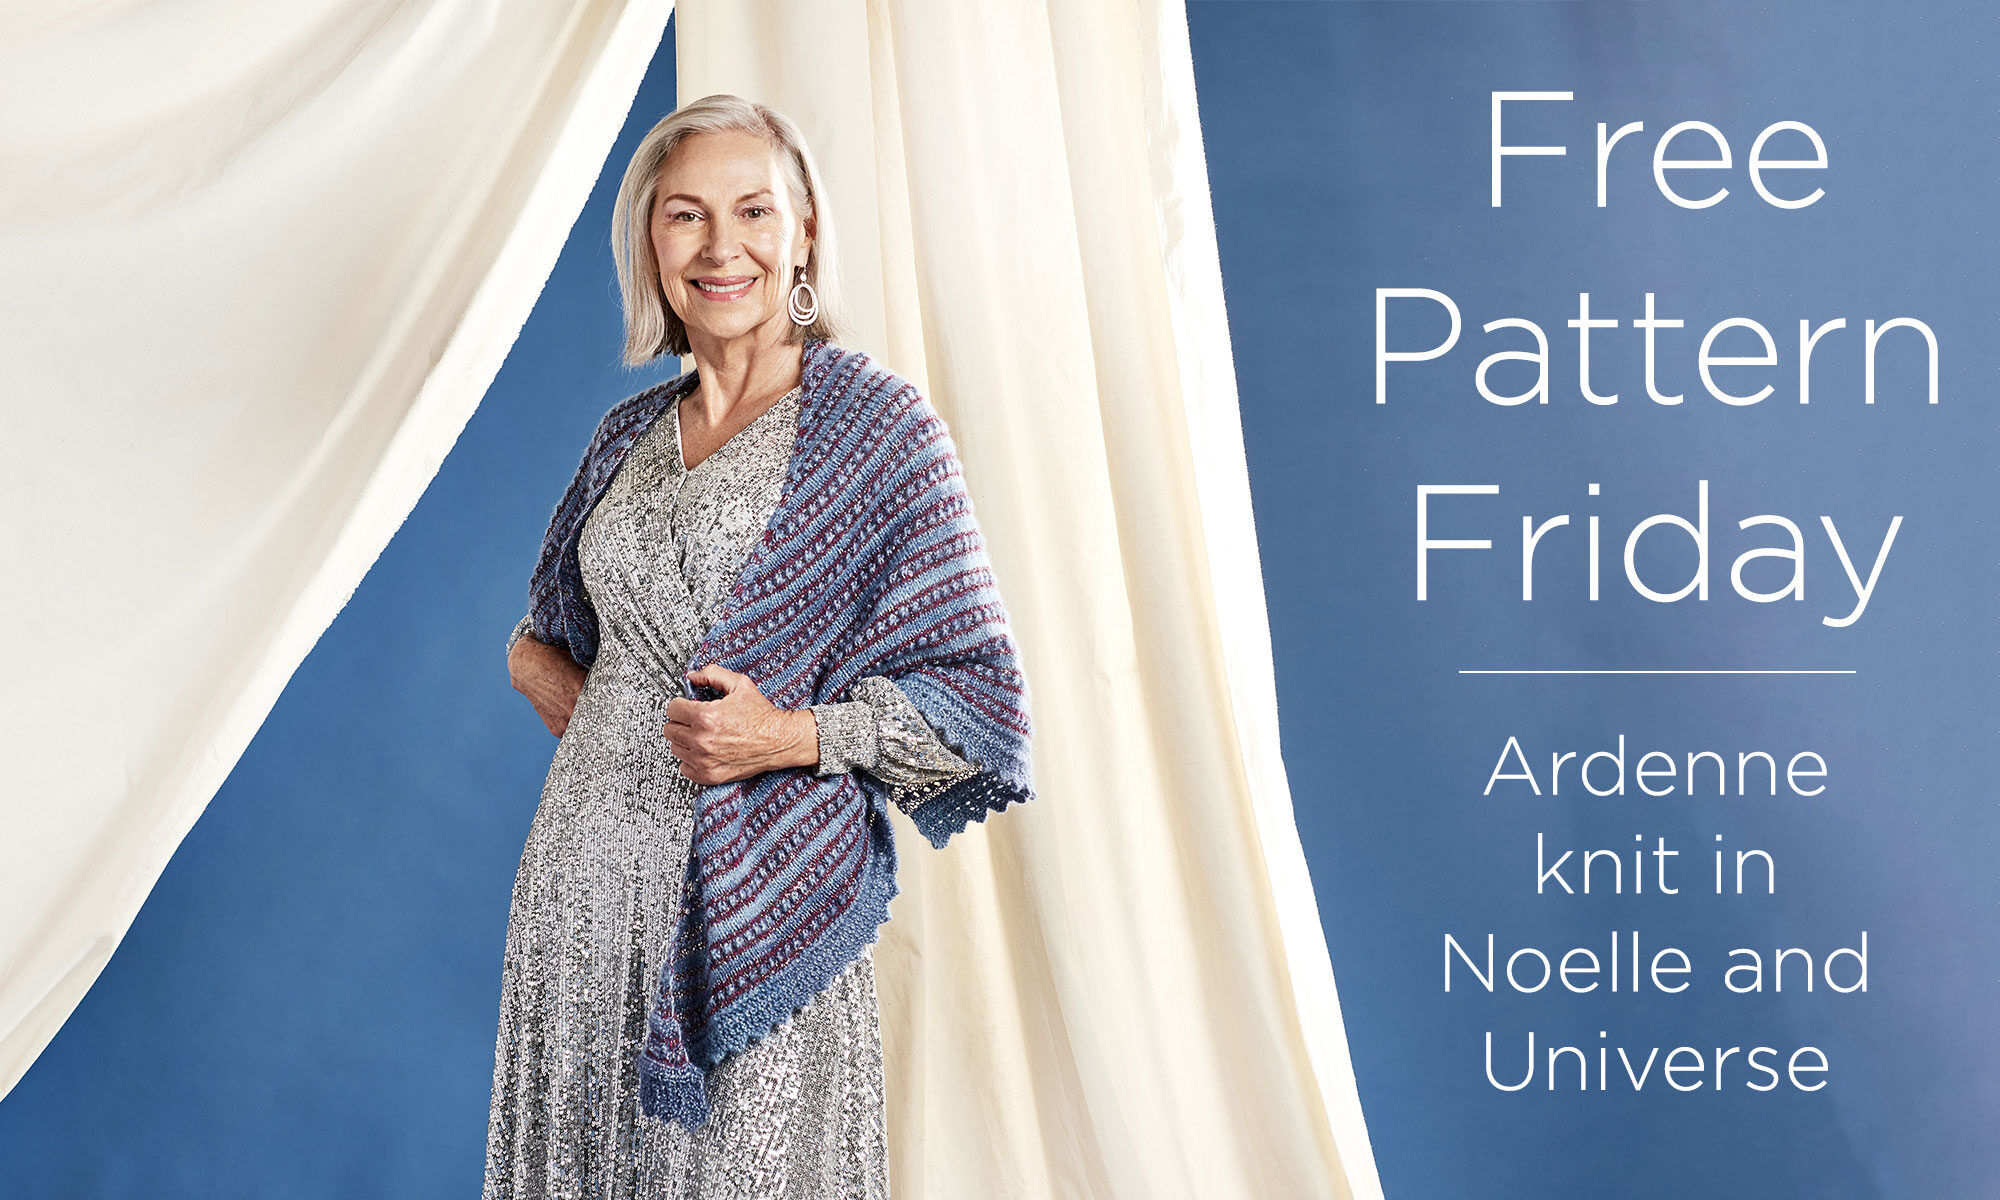 Photo of a person wearing the Ardenne shawl with a blue and white background with text to the right saying "Free Pattern Friday - Ardenne knit in Noelle and Universe"